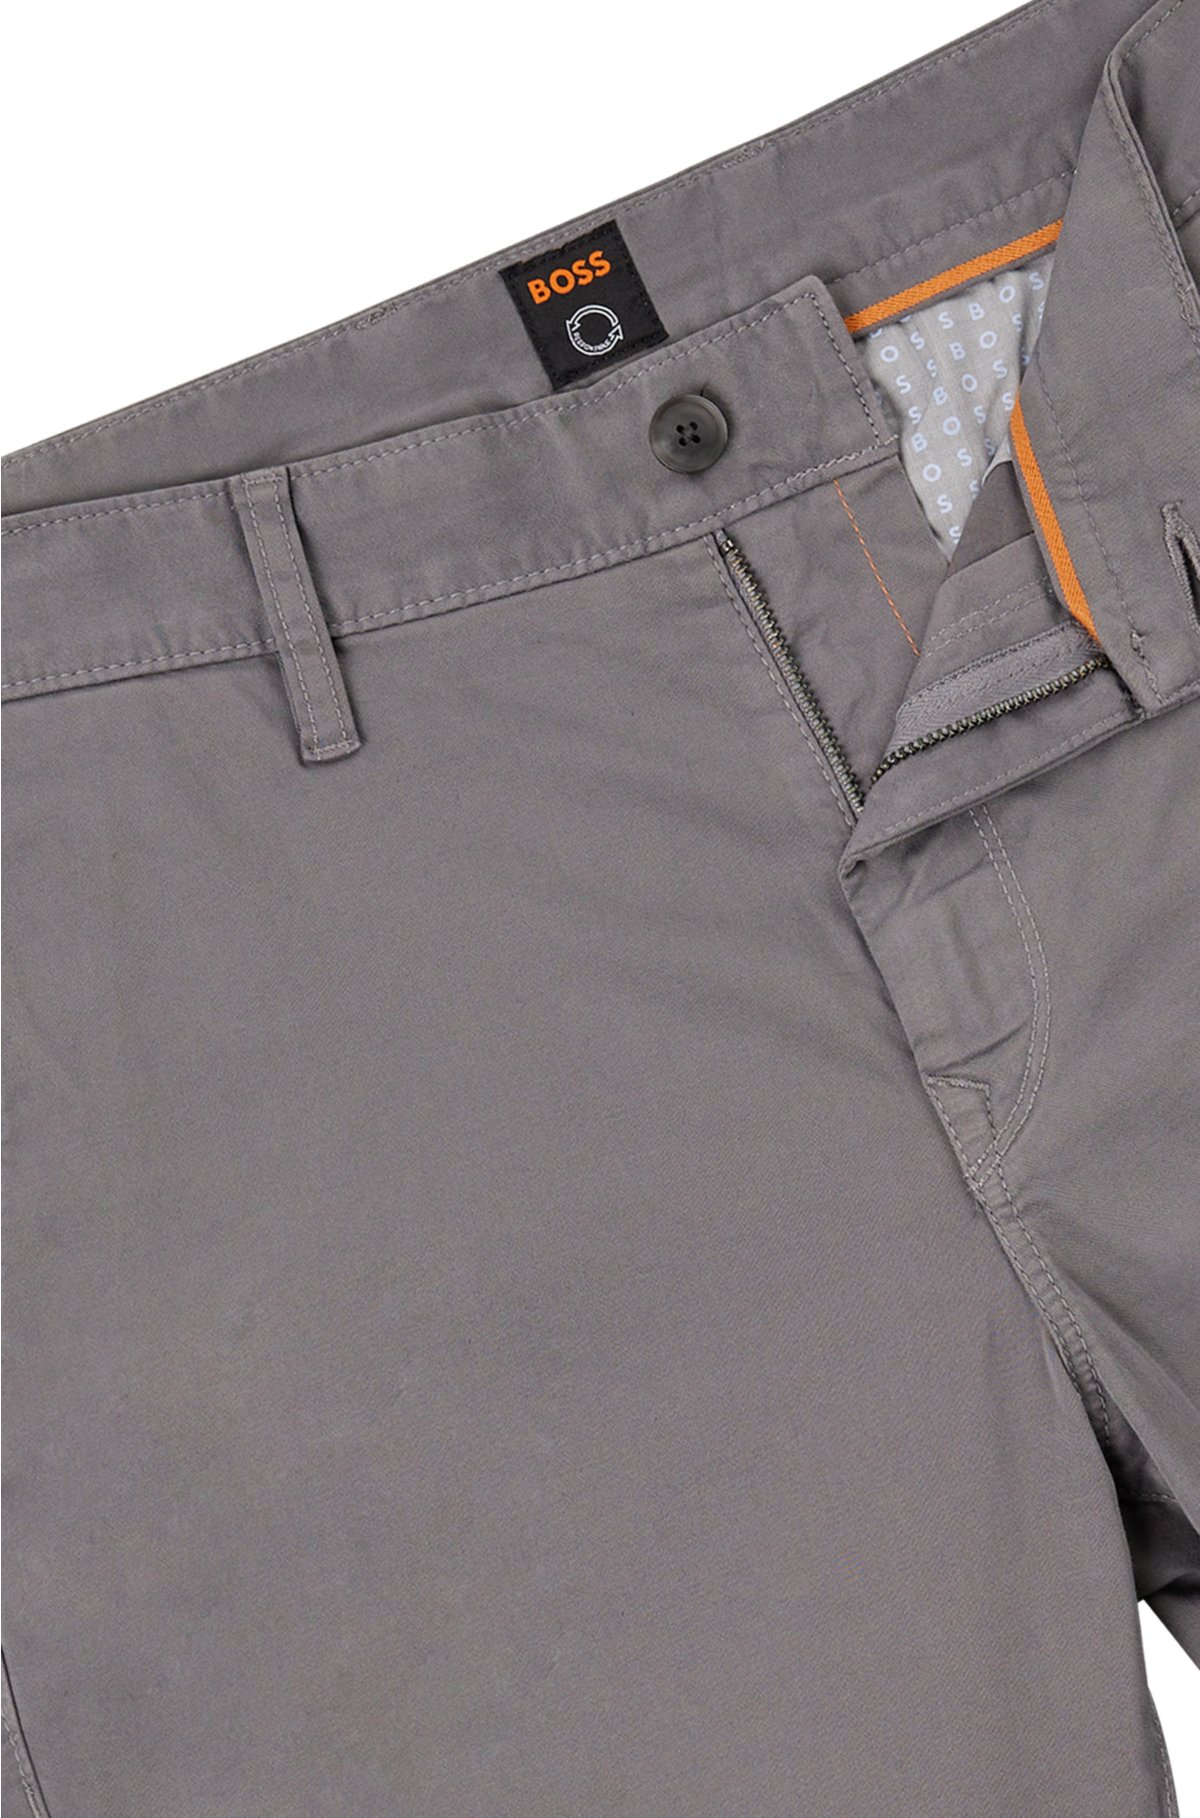 stretch-cotton overdyed BOSS satin chinos - Tapered-fit in